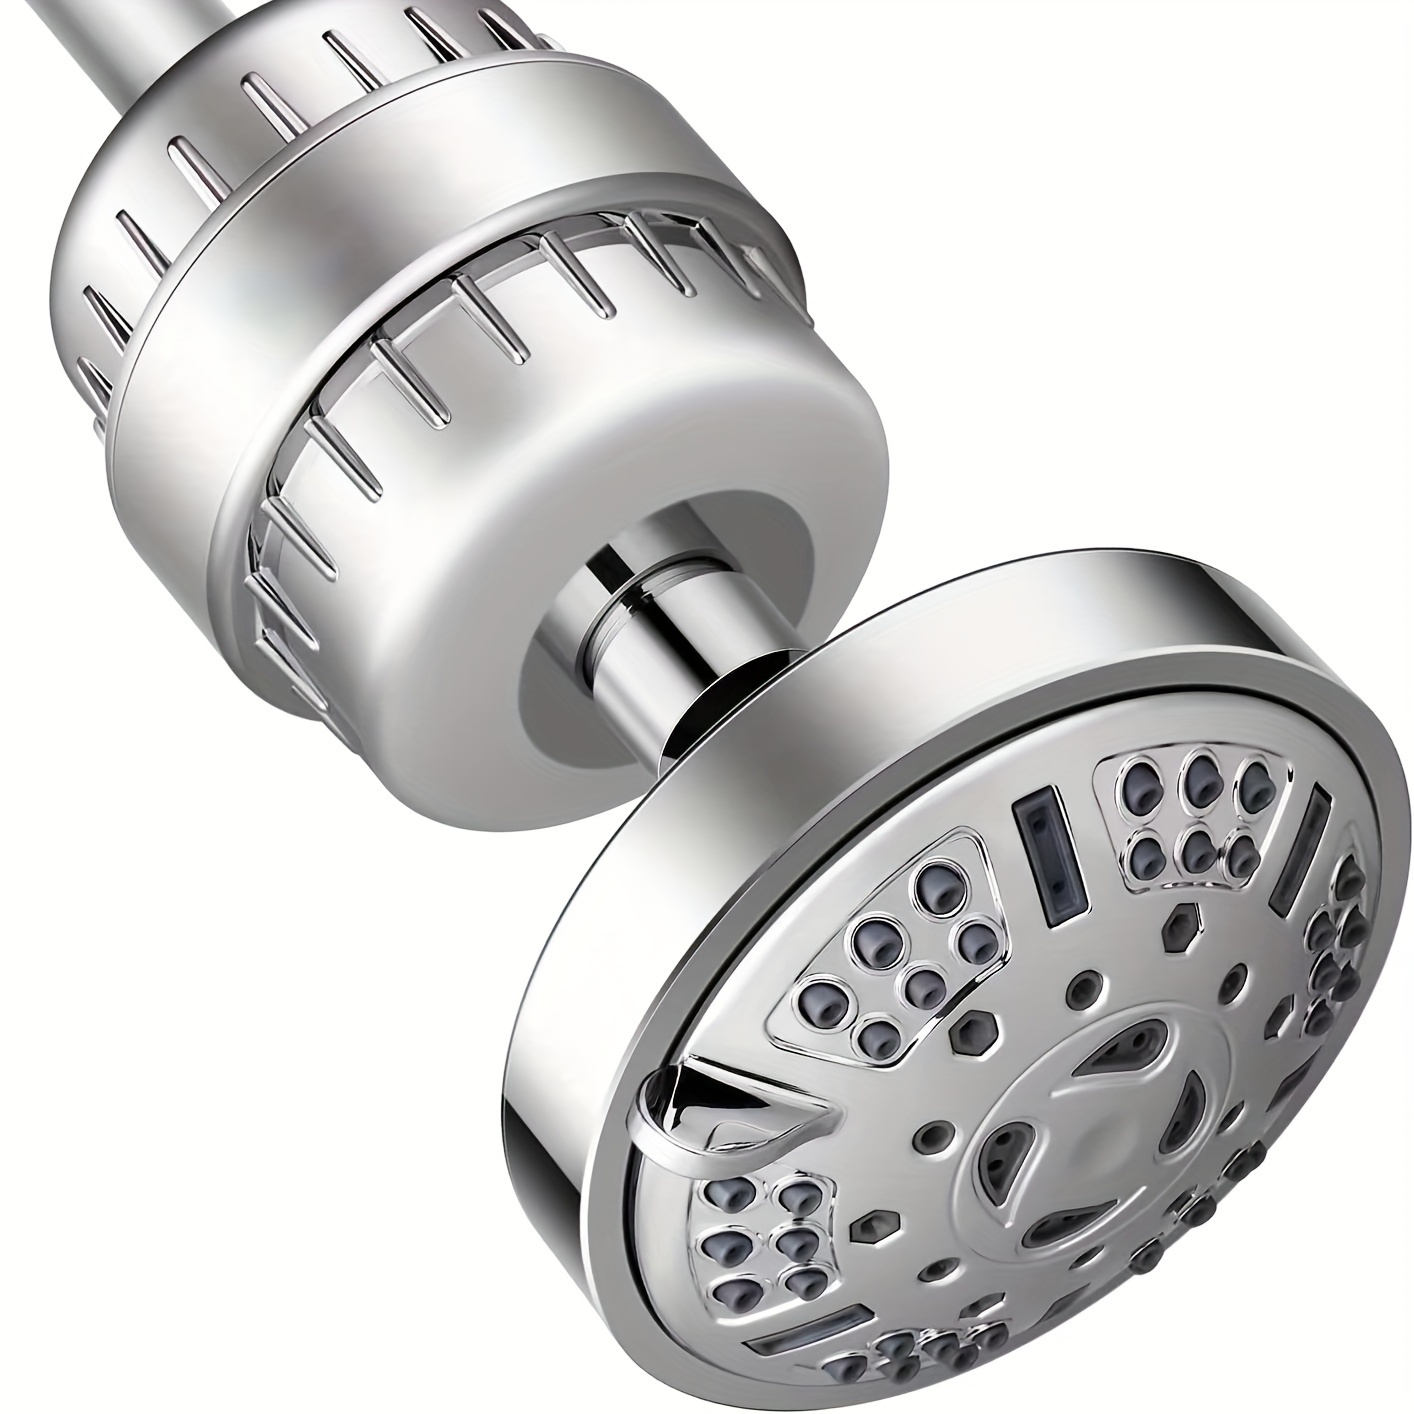 

Shower Head And 18 Stage Shower Filter Combo, High Pressure 9 Spray Settings, Improves The Condition Of Your Skin, Hair